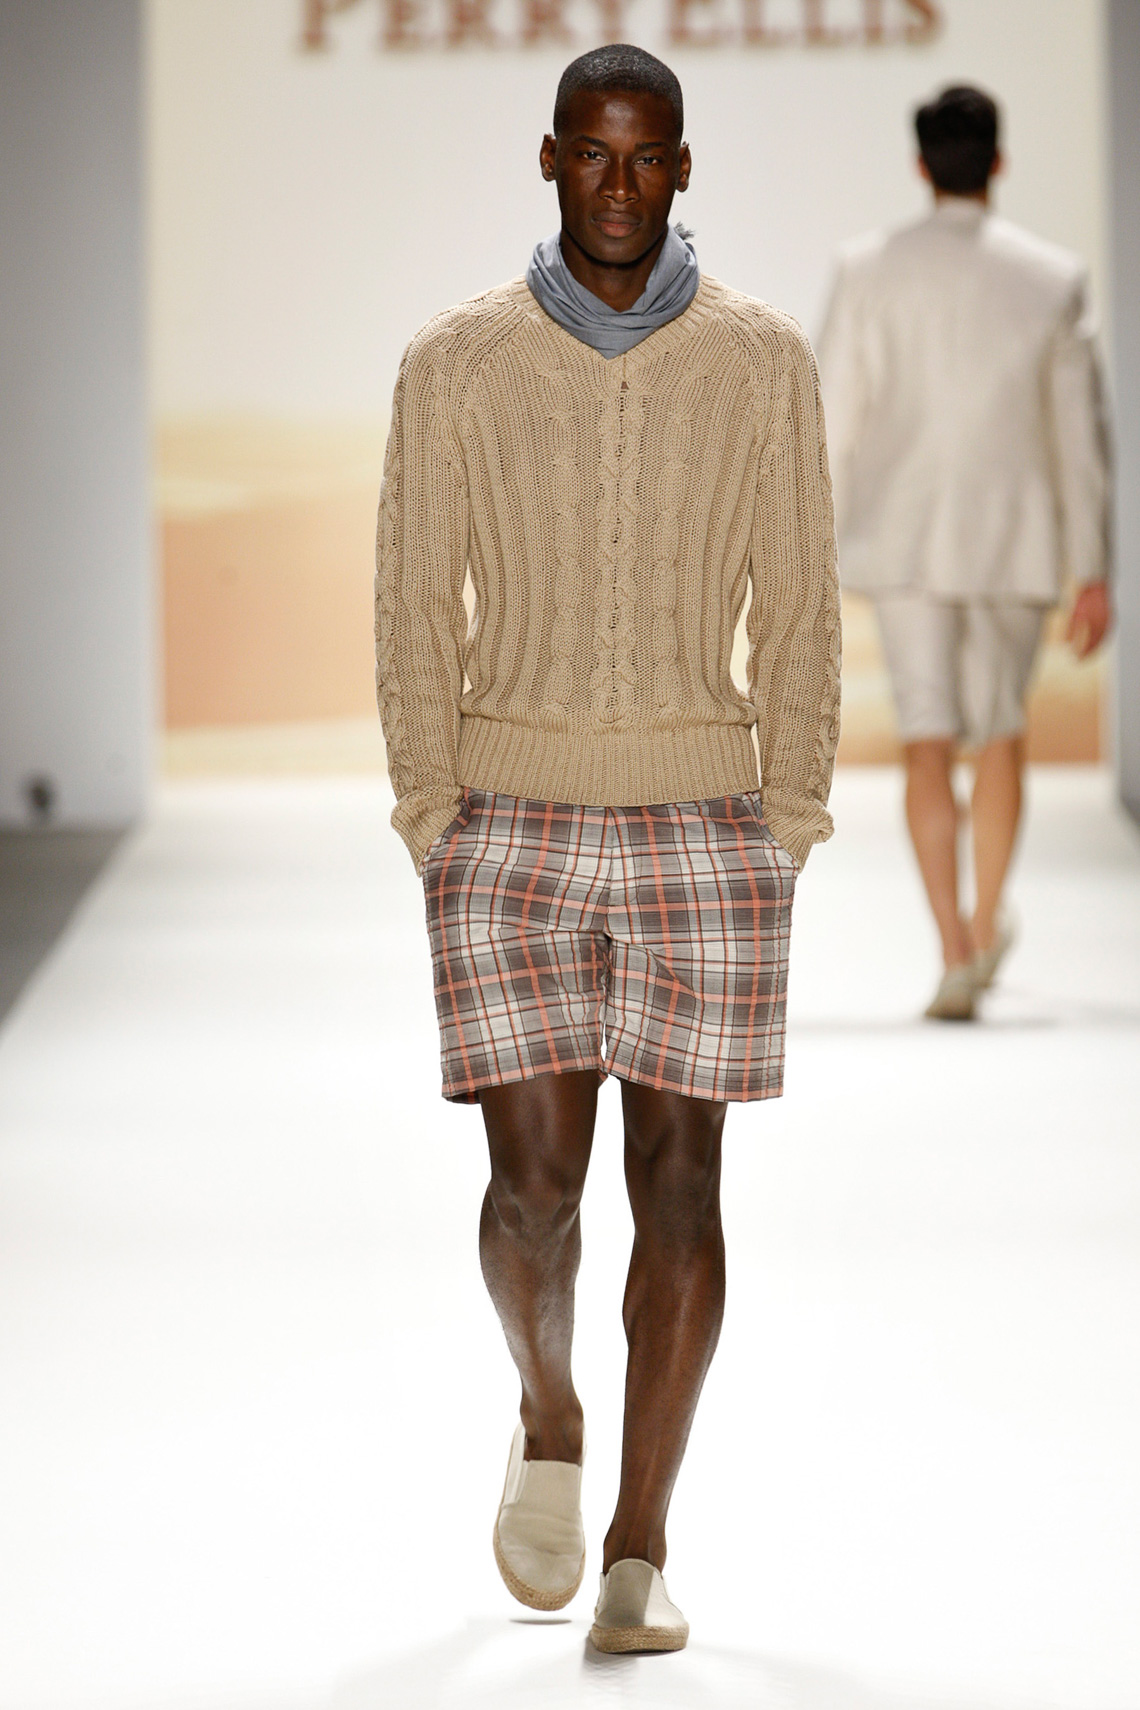 Perry Ellis SS2012 Collection